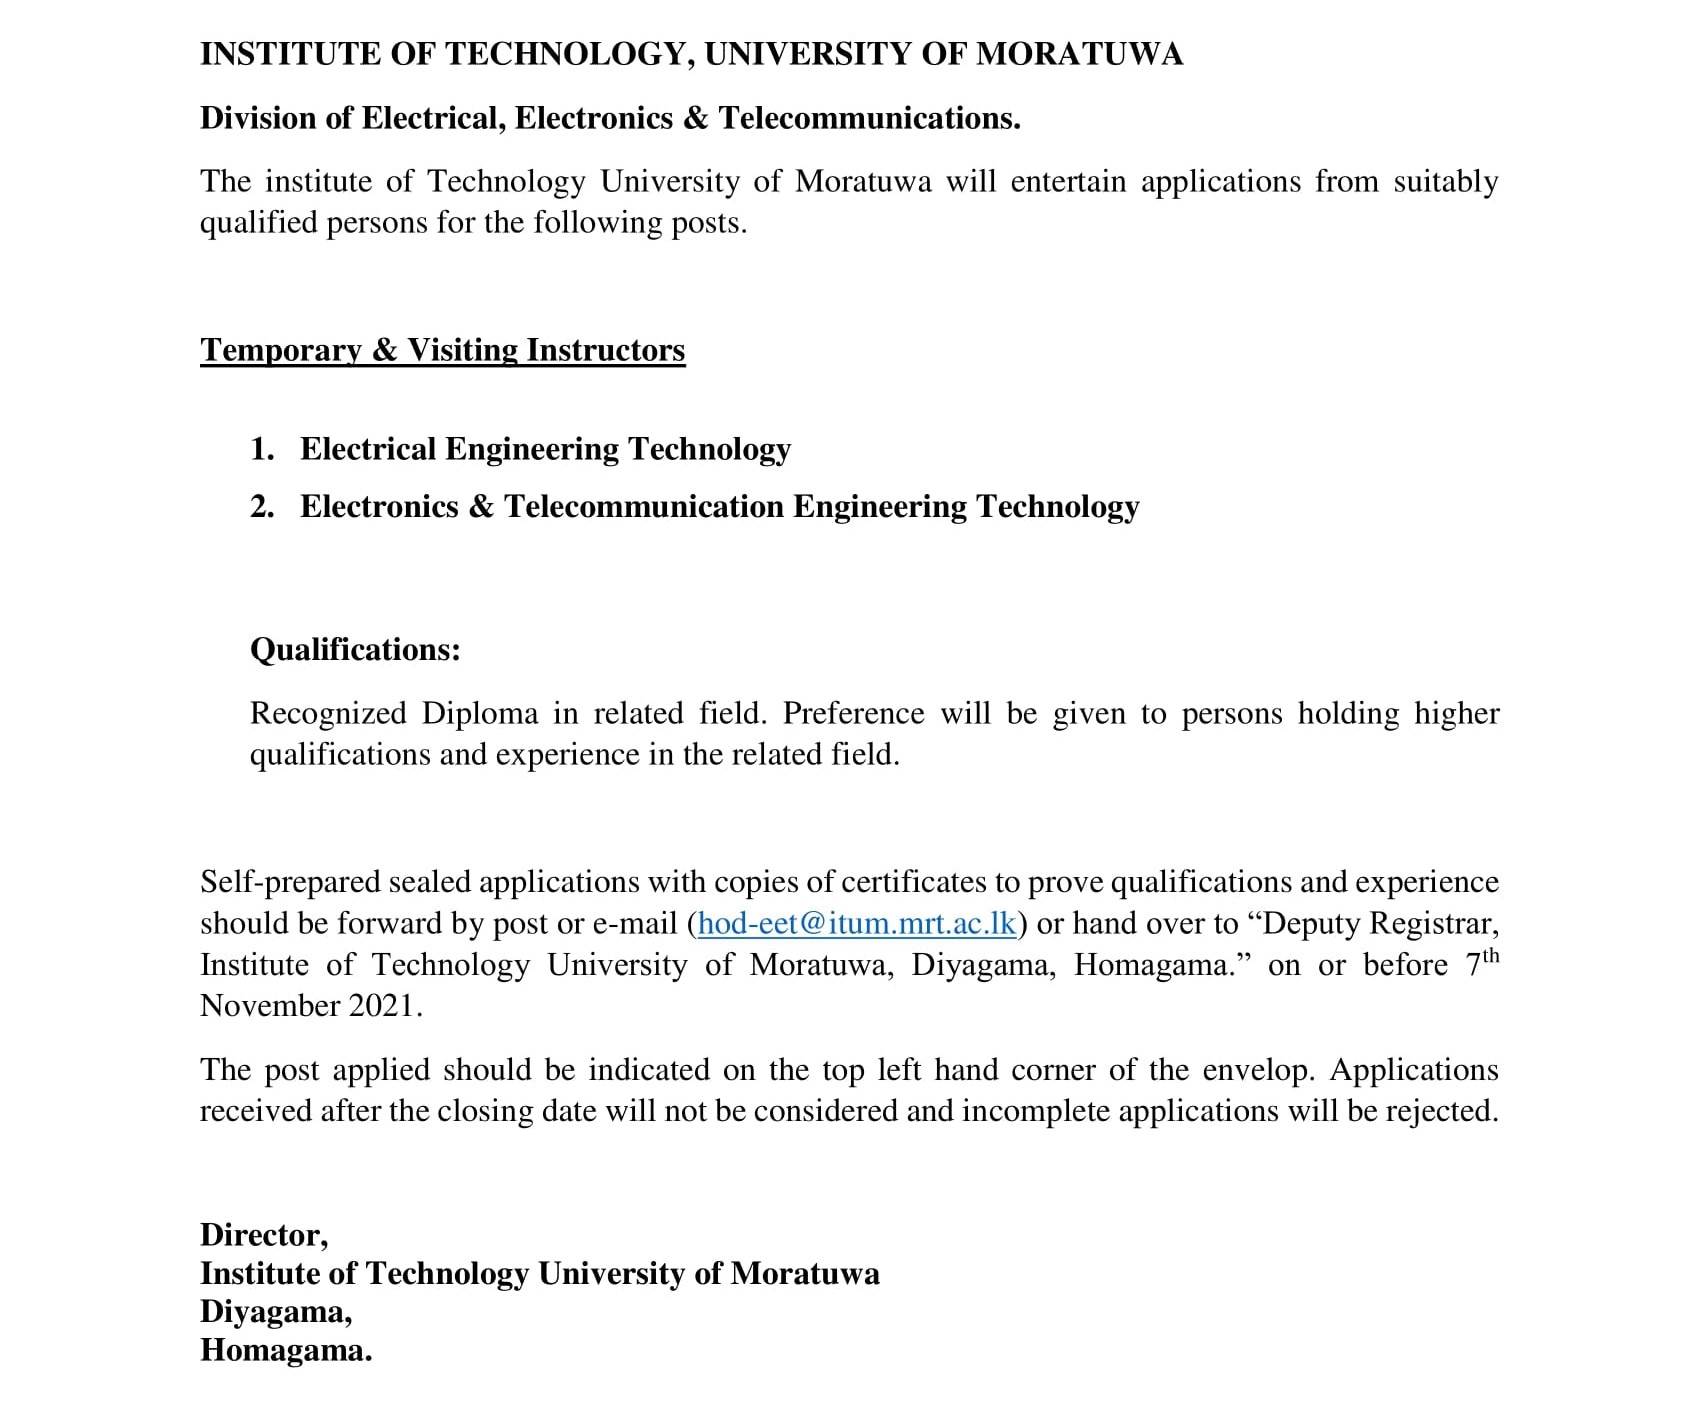 Temporary & Visiting Instructor - Institute of Technology - University of Moratuwa